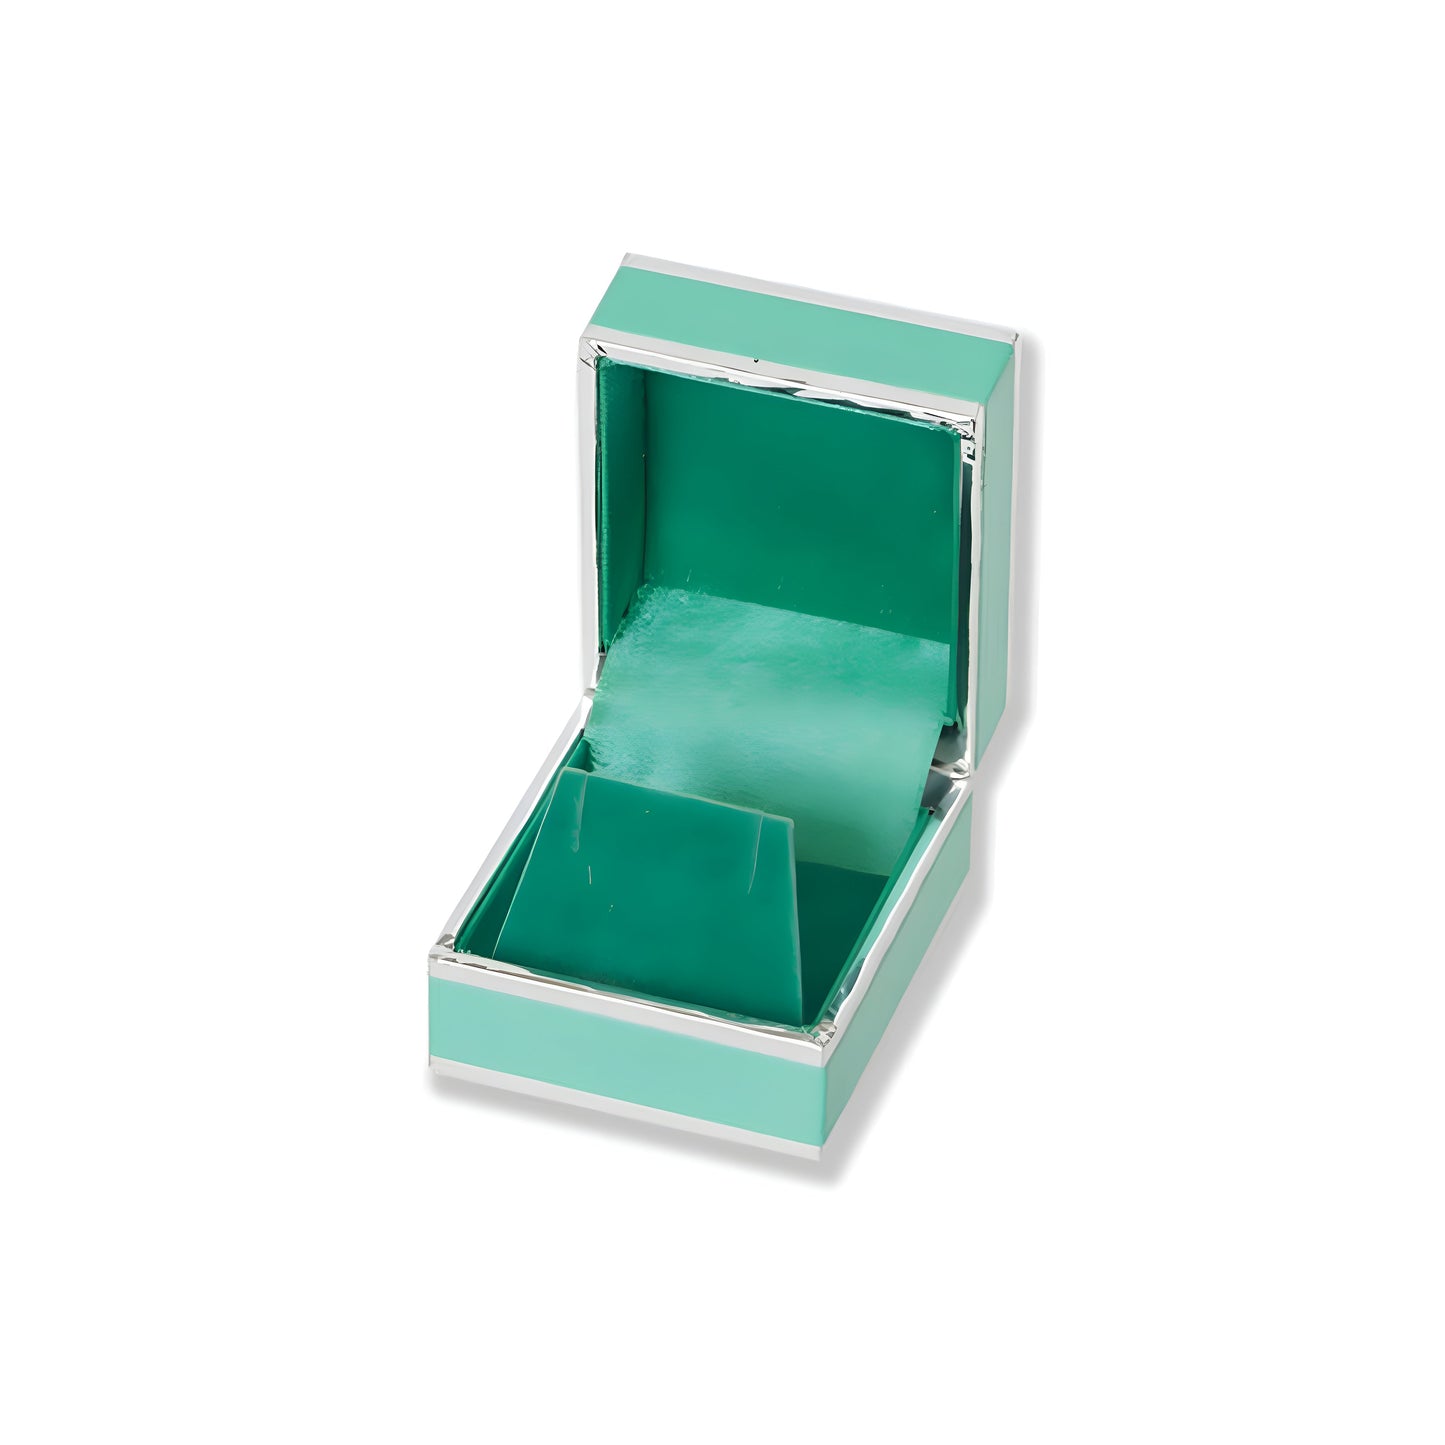 Monza Earring Box - Green / Silver (Pack of 12)